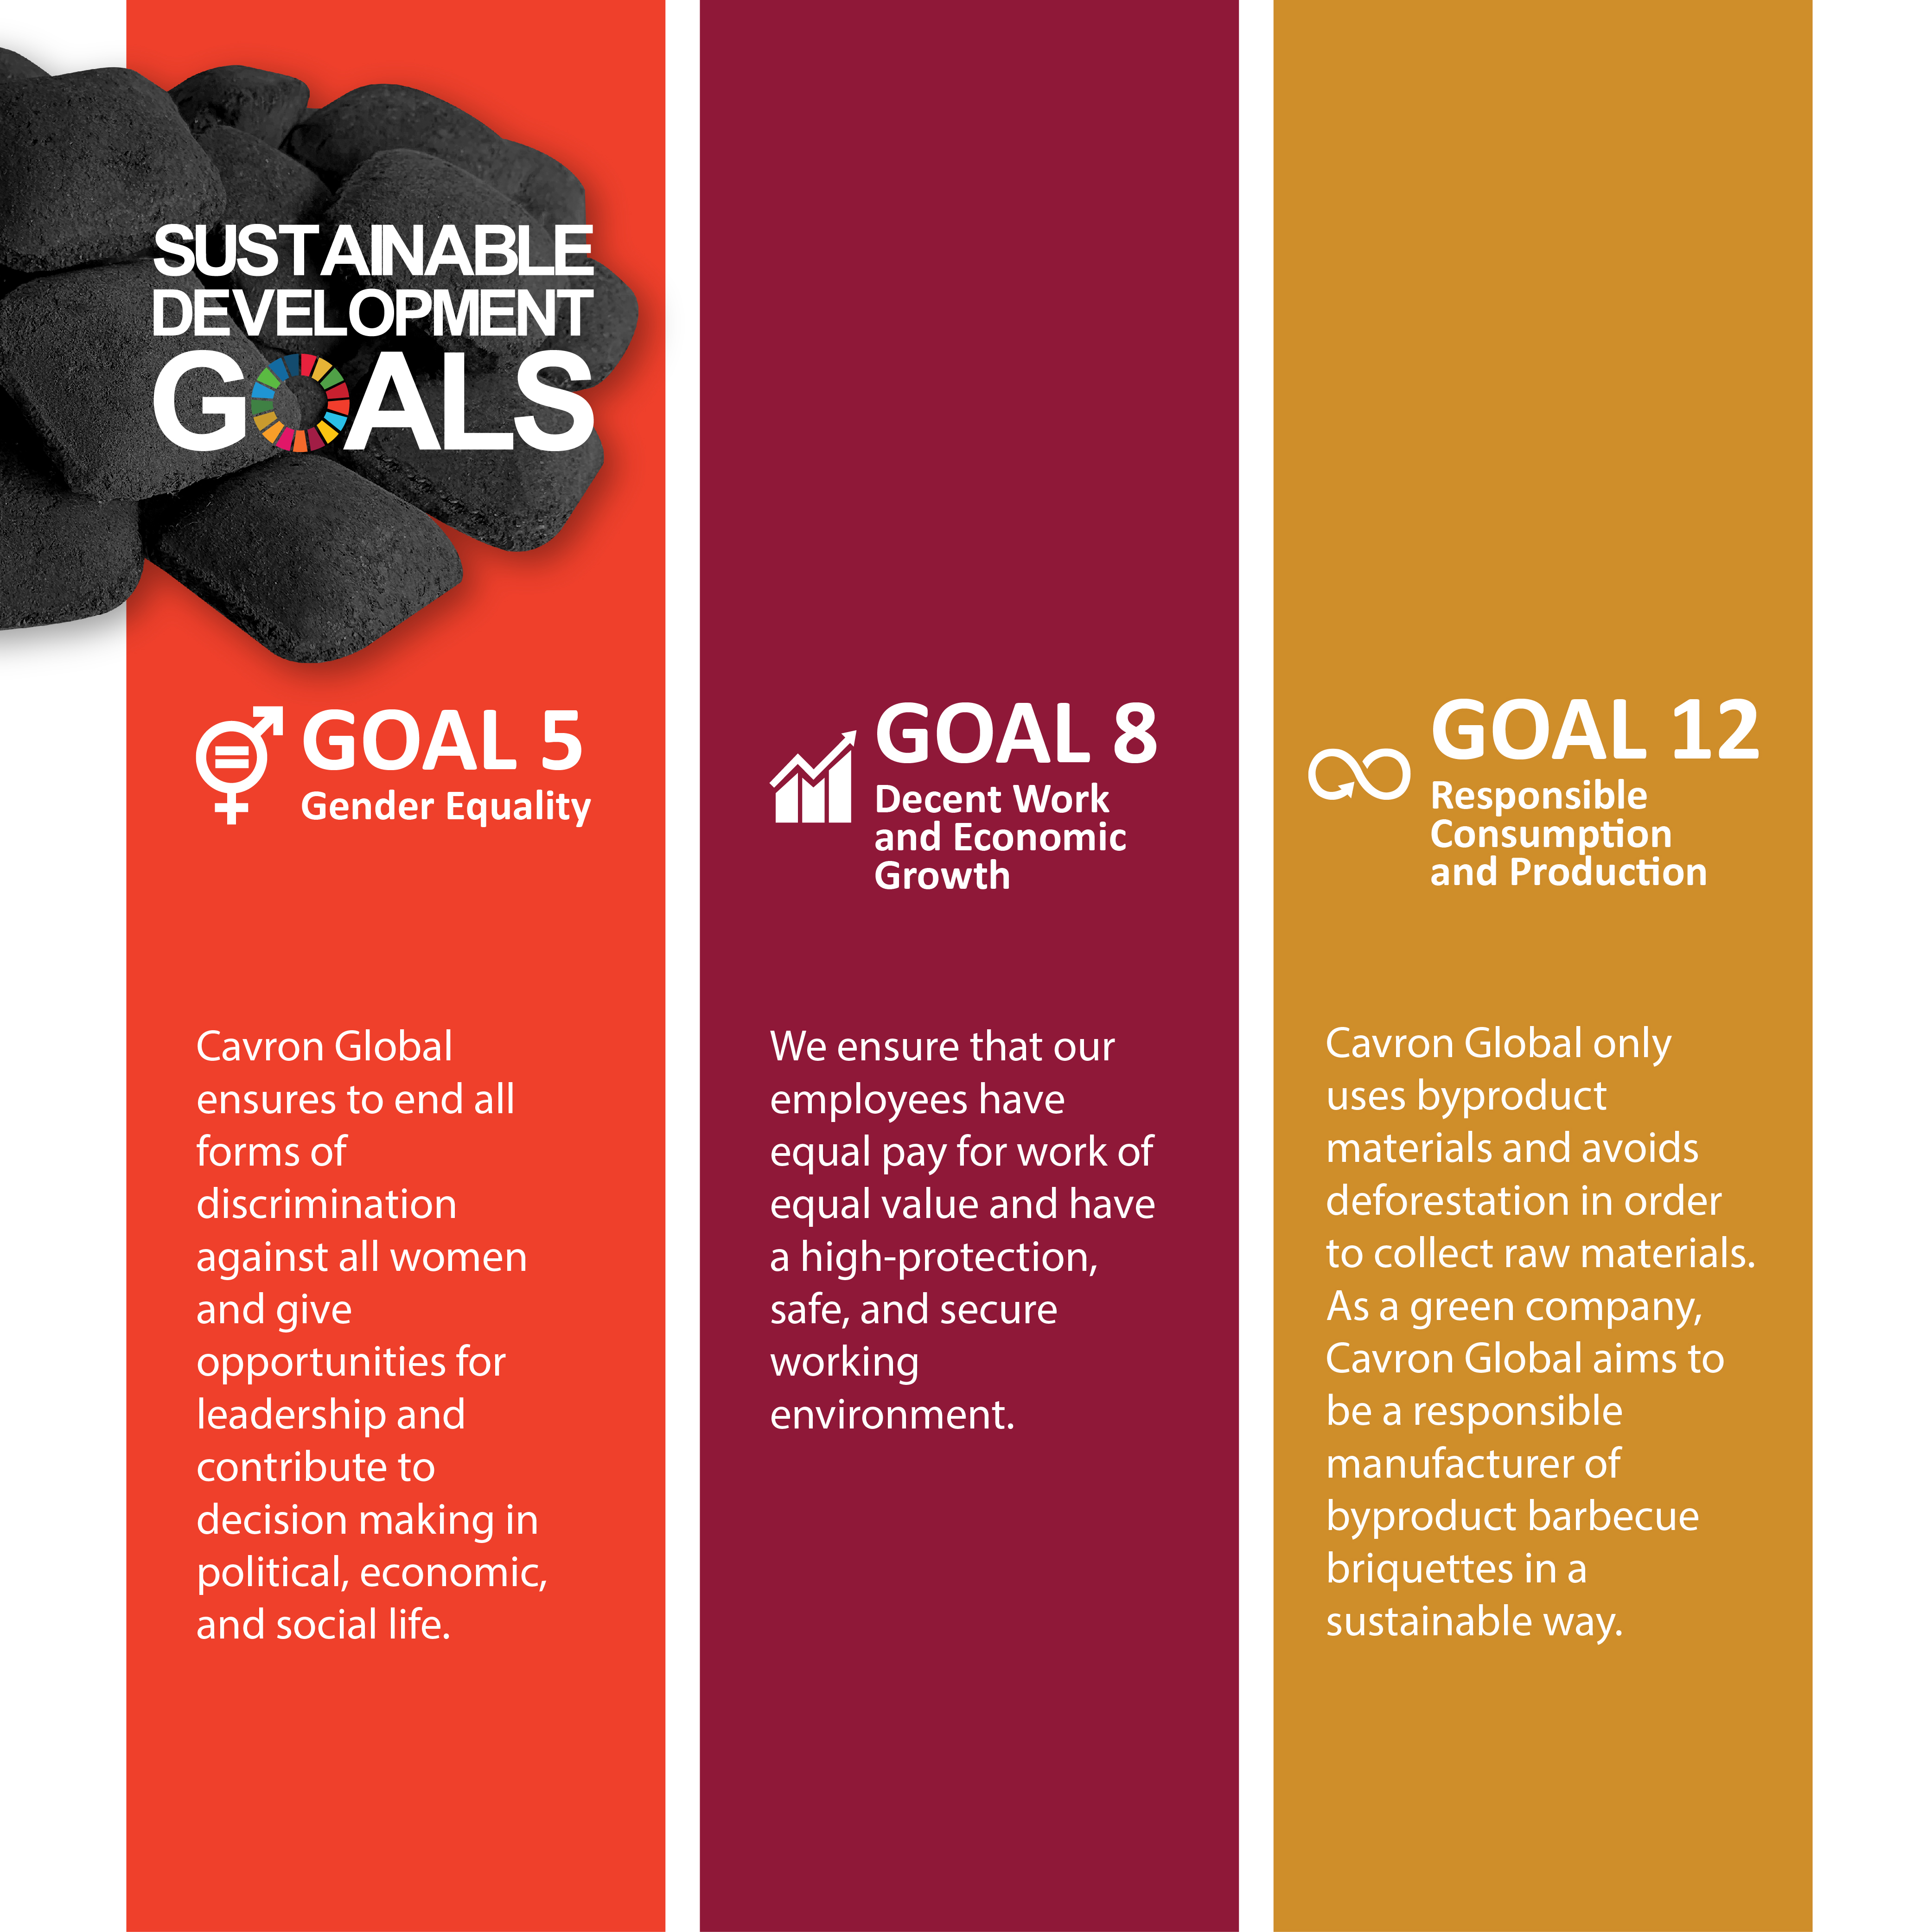 Cavron Global supports Sustainable Development Goals with UN Globals